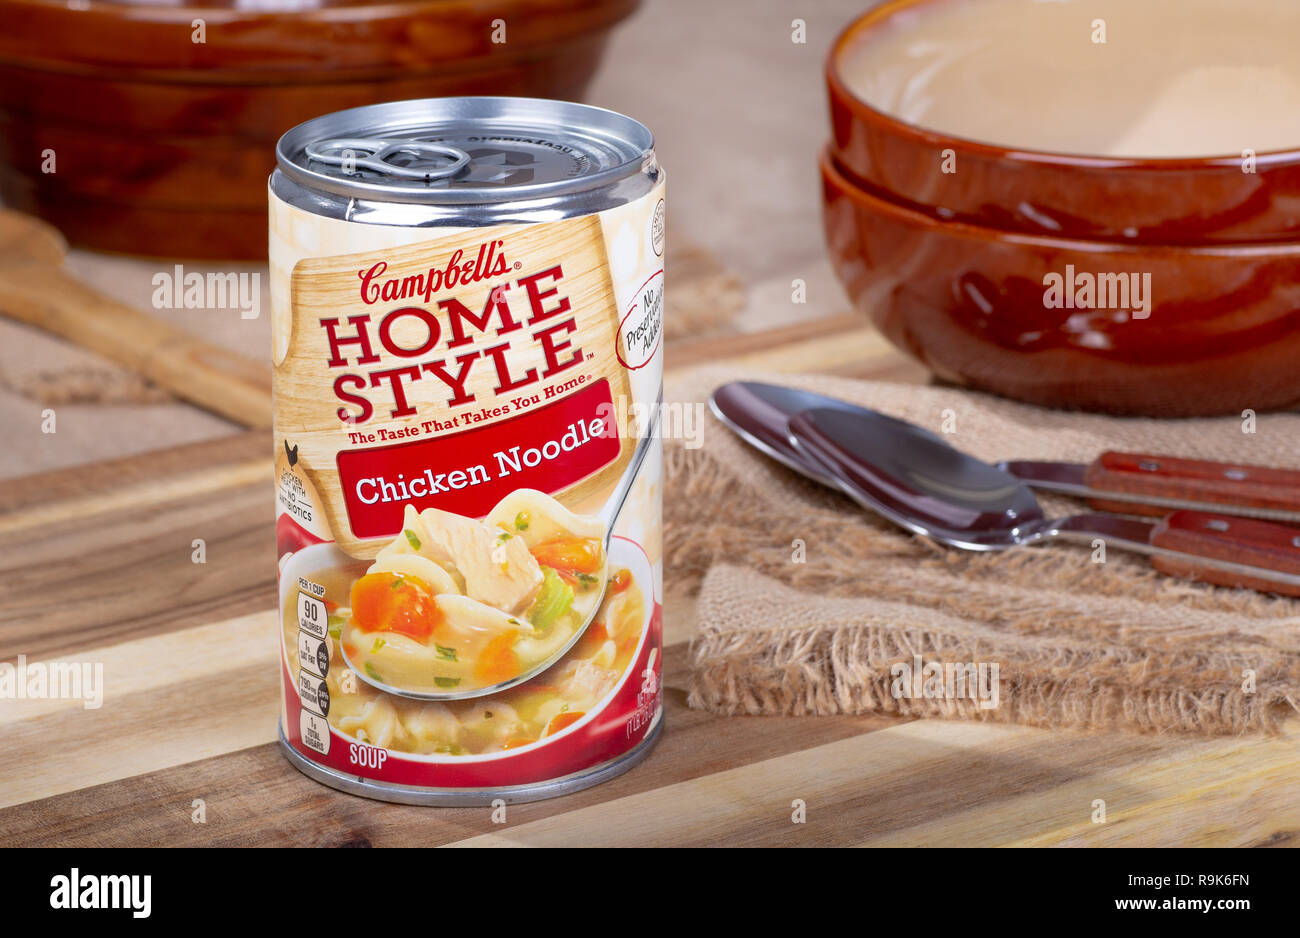 DECEMBER 17, 2018: Closeup of a can of Campbells Home Style Chicken Noodle Soup Stock Photo